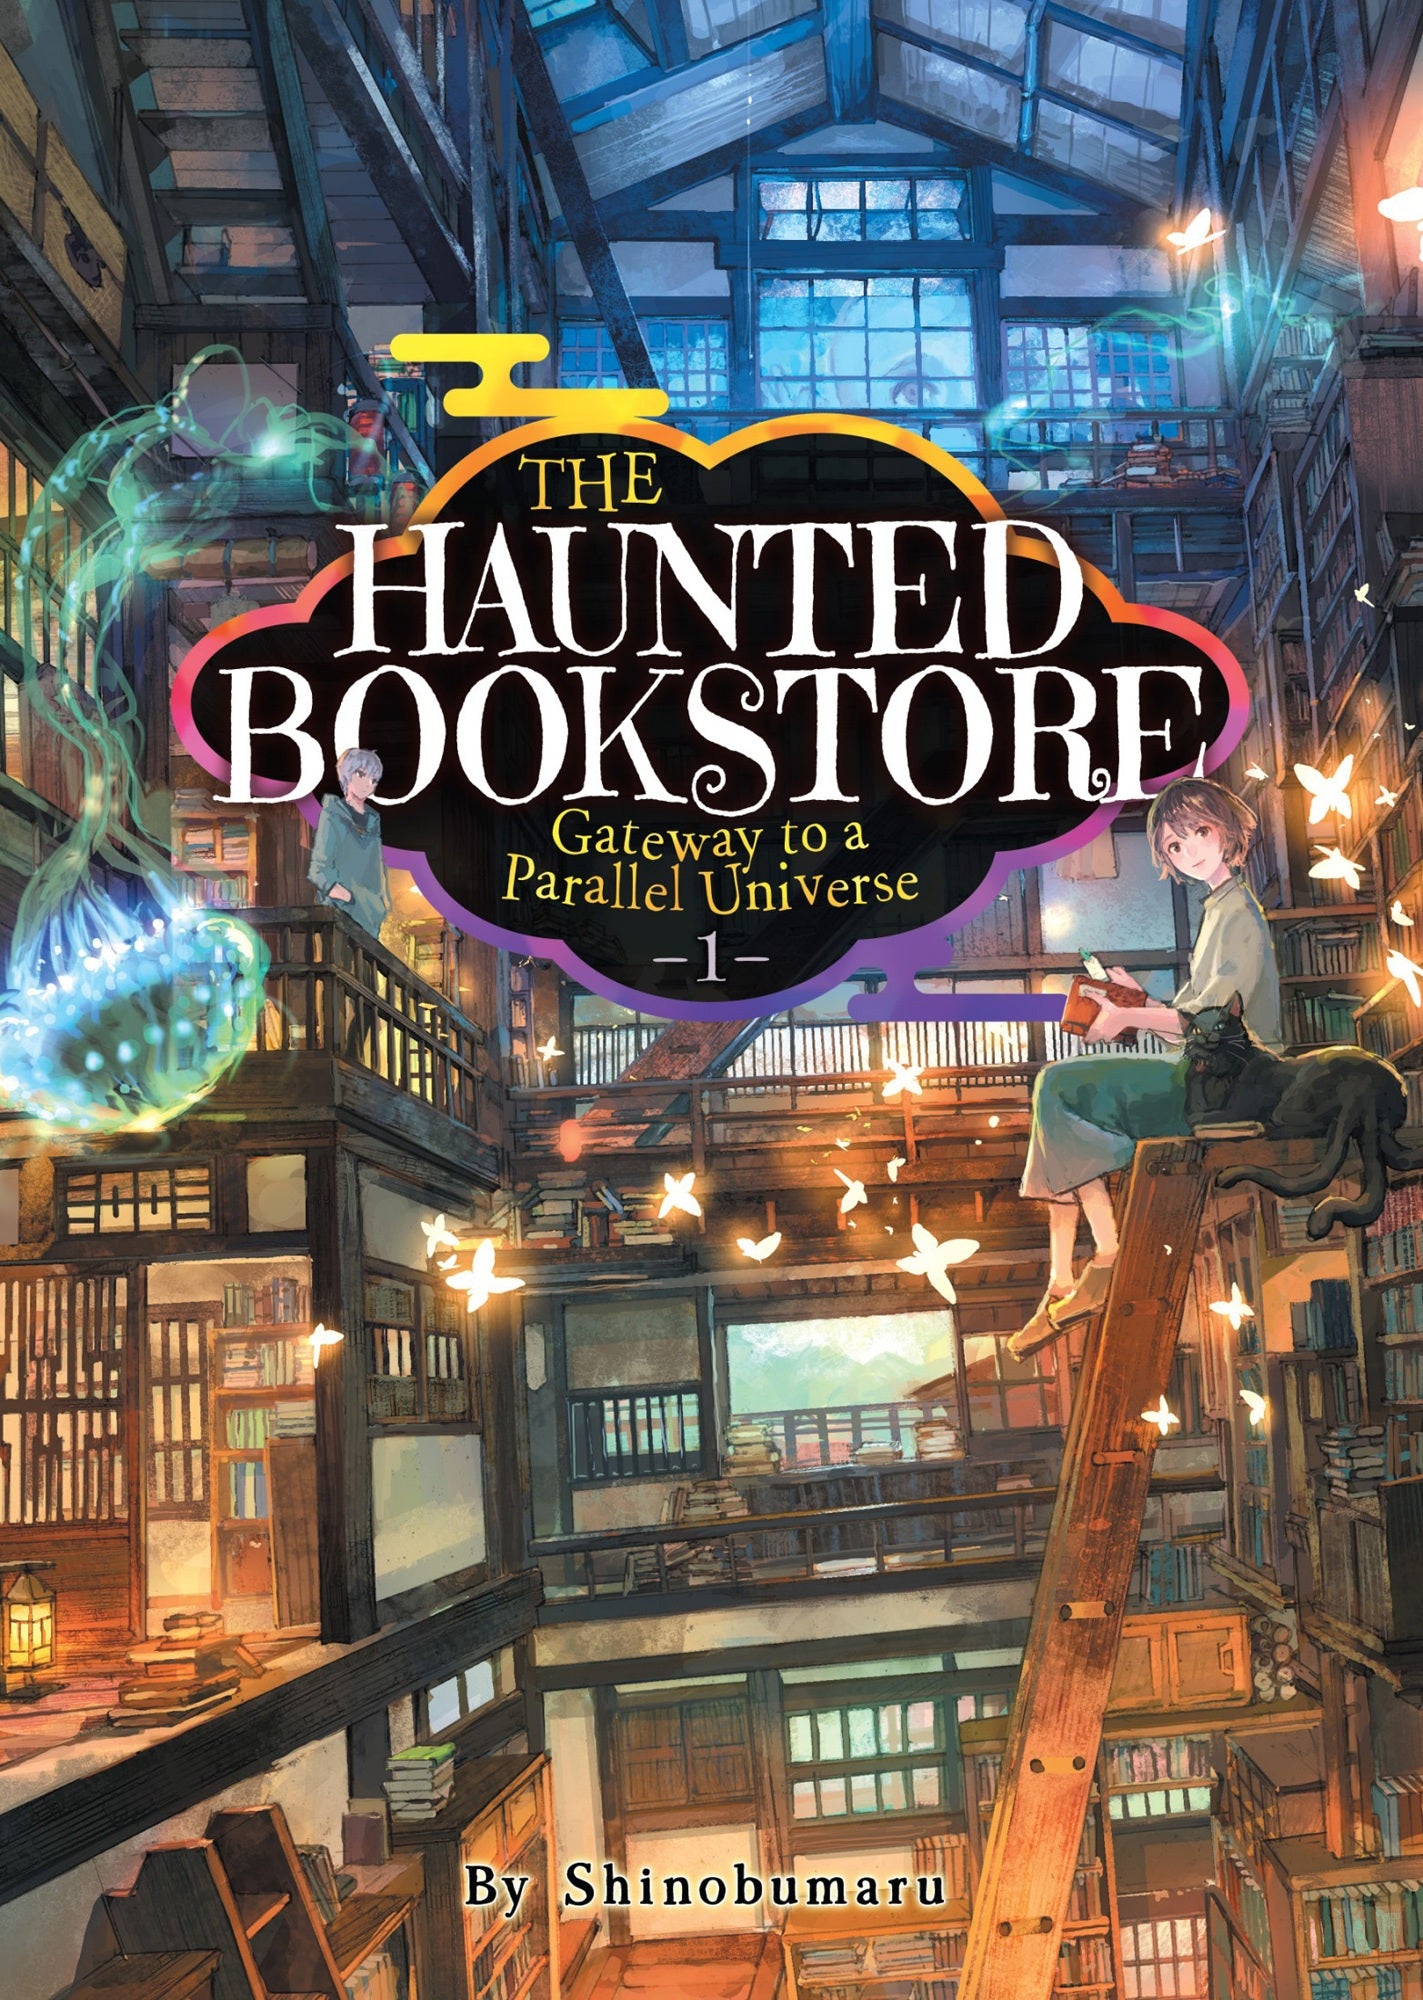 The Haunted Bookstore - Gateway to a Parallel Universe (Light Novel) Vol. 01